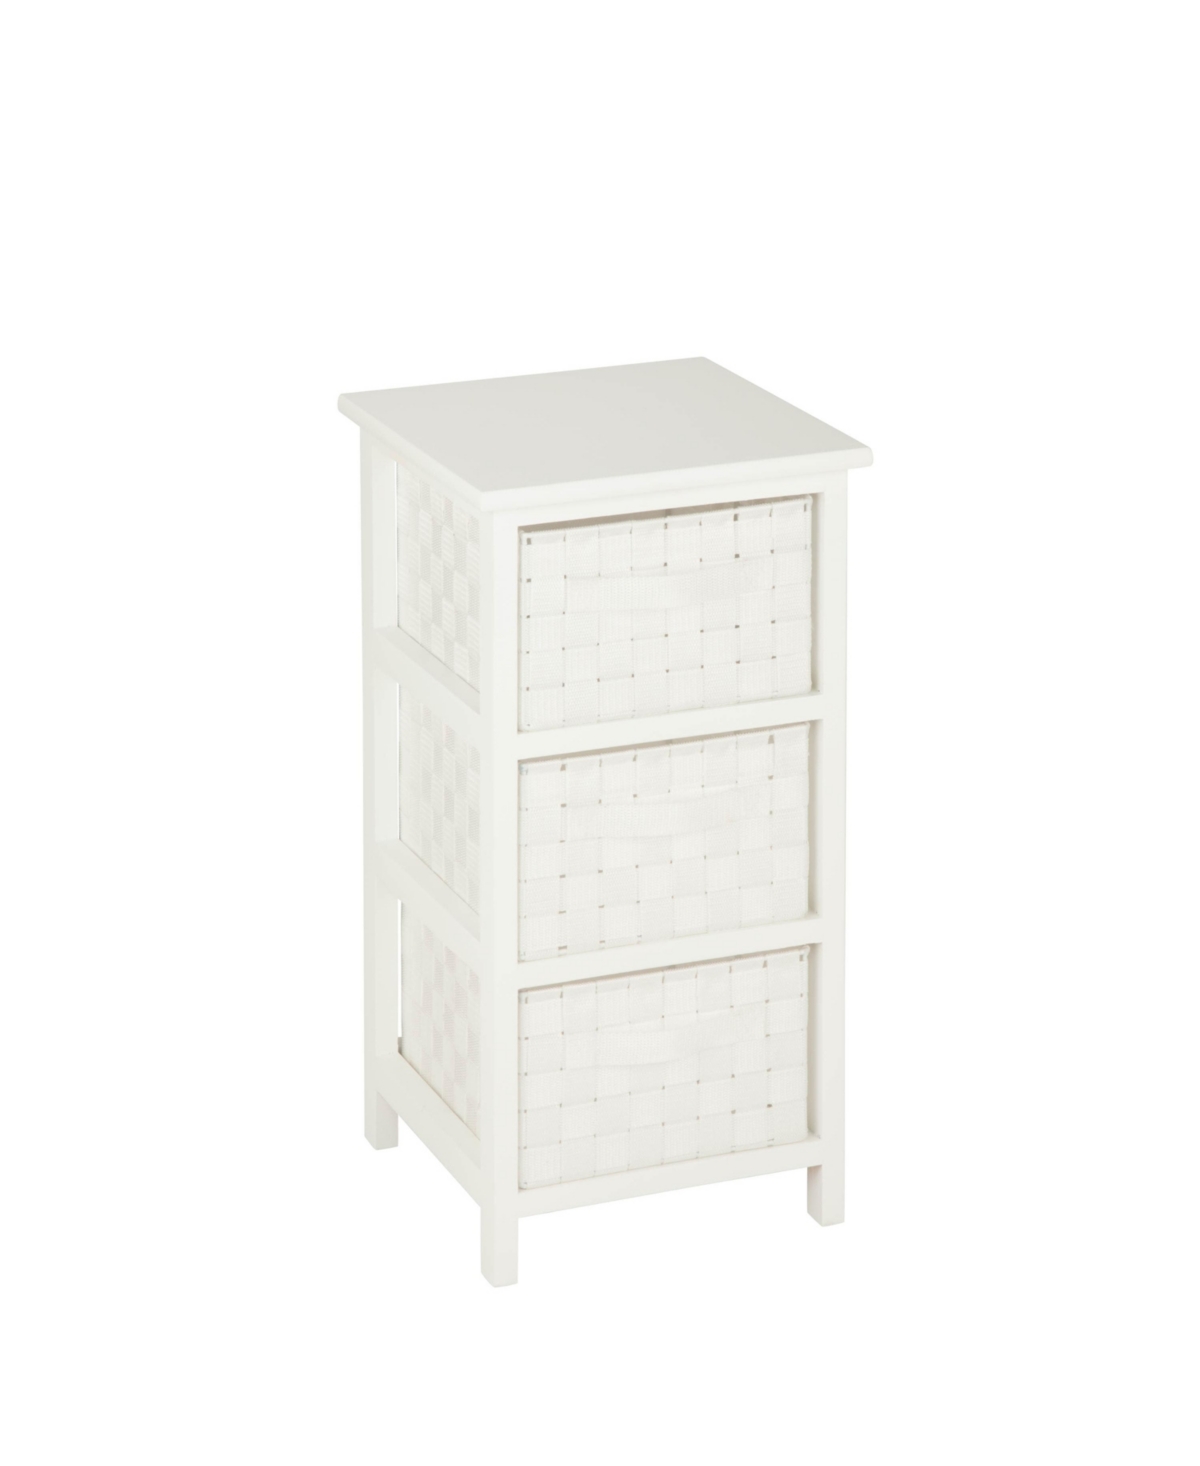 Honey Can Do Wooden Frame Woven Fabric Small Storage Cabinet Drawers In White